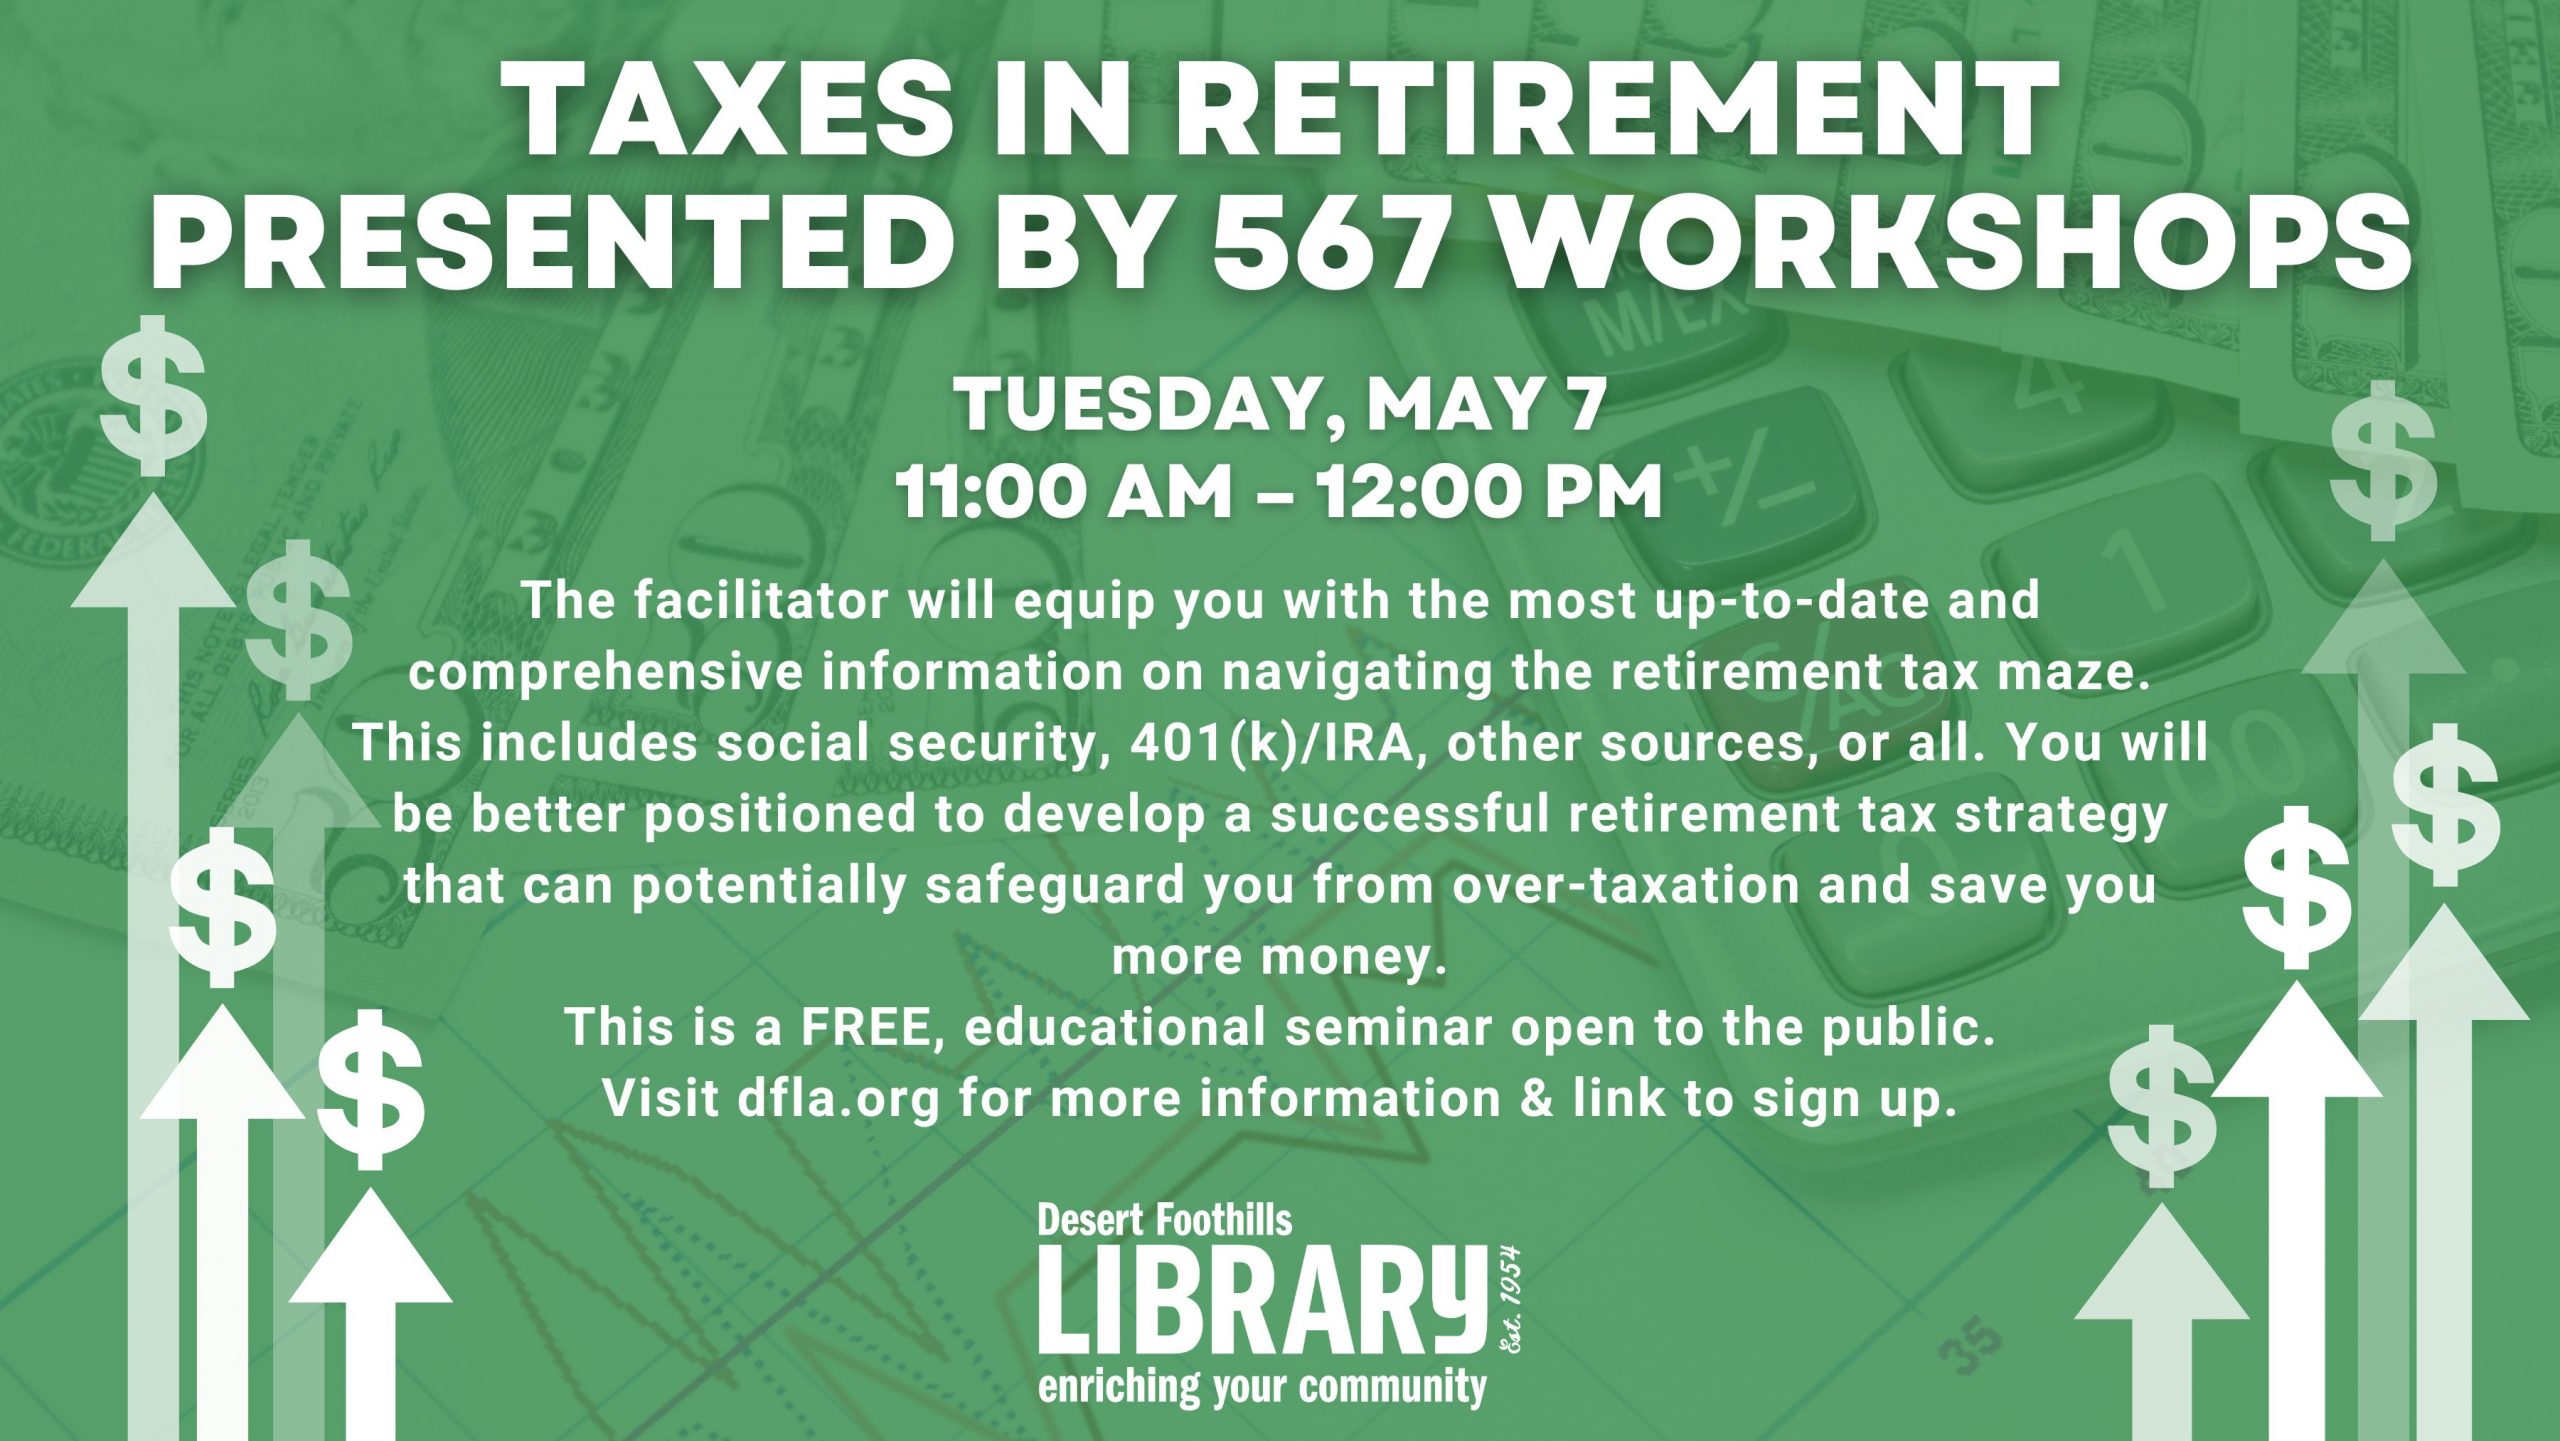 Taxes in Retirement workshop at the desert foothills library